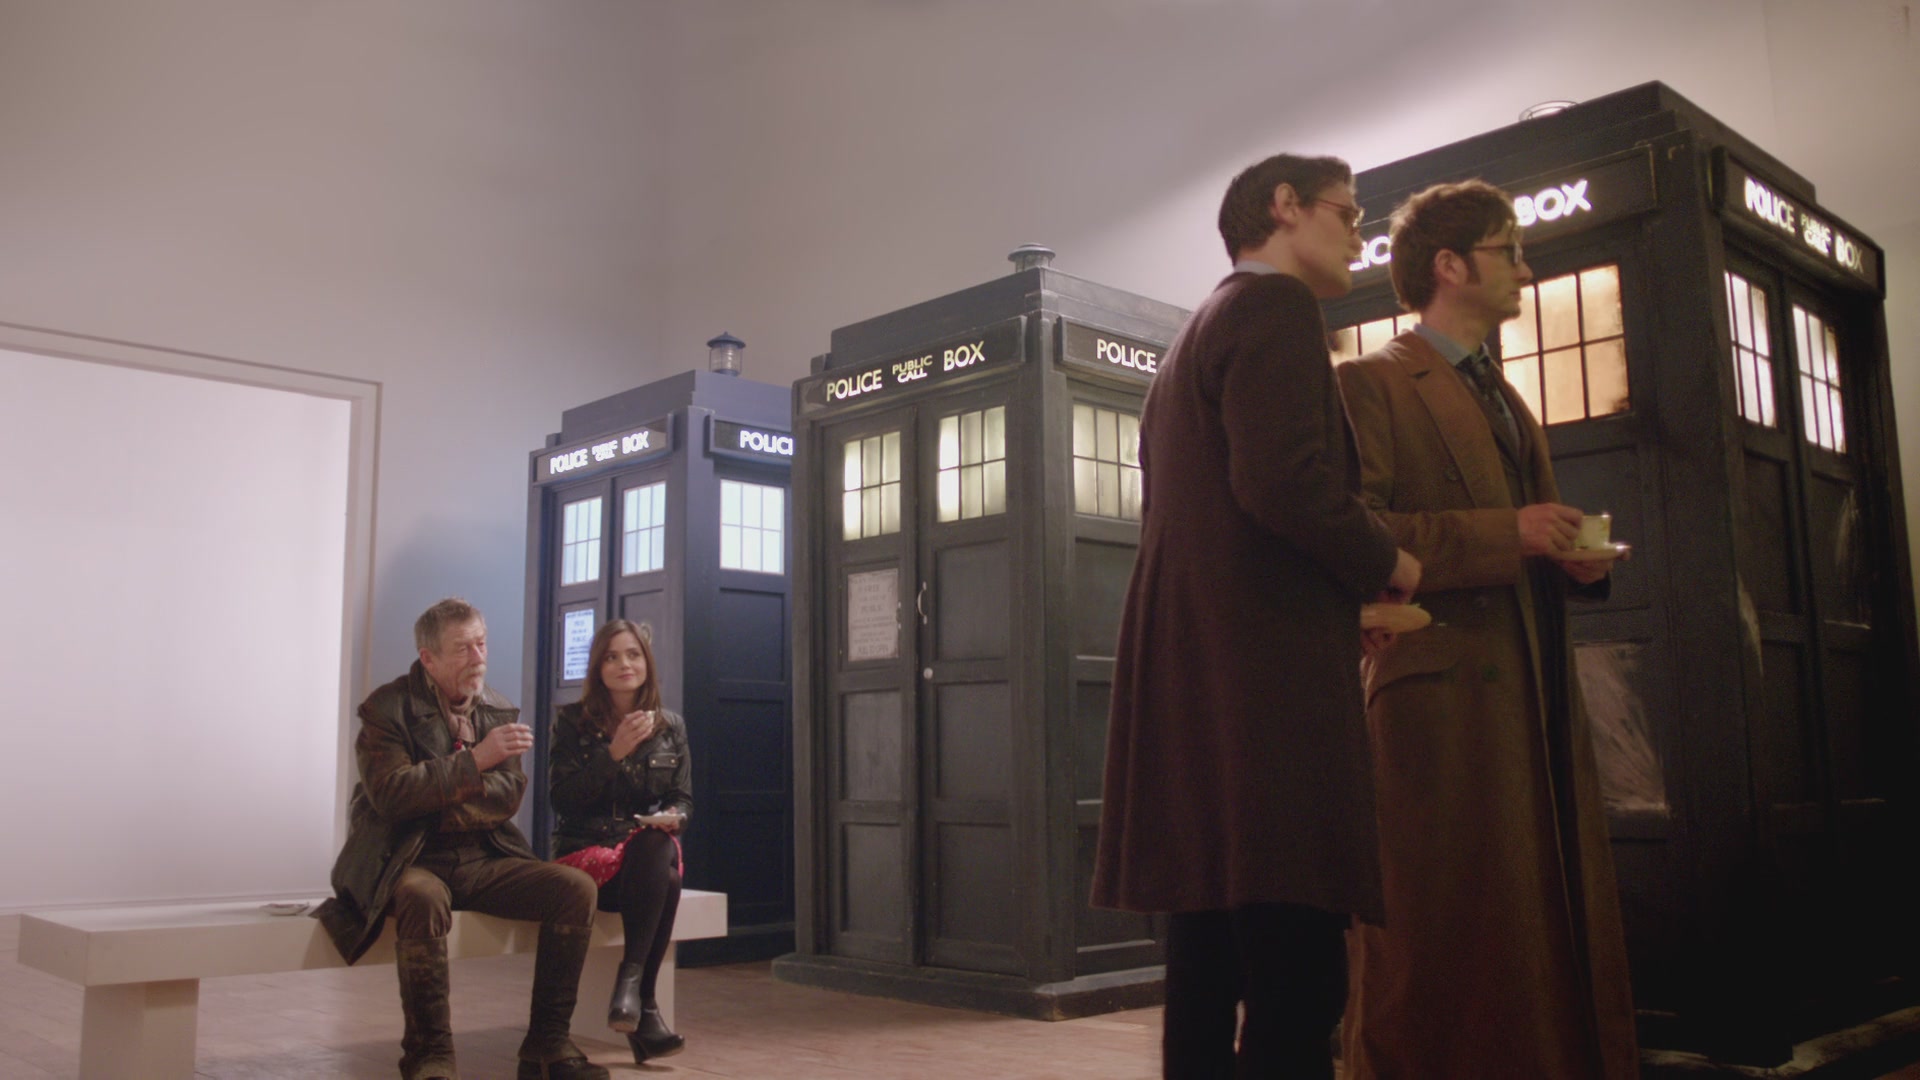 DayOfTheDoctor-Caps-1239.jpg